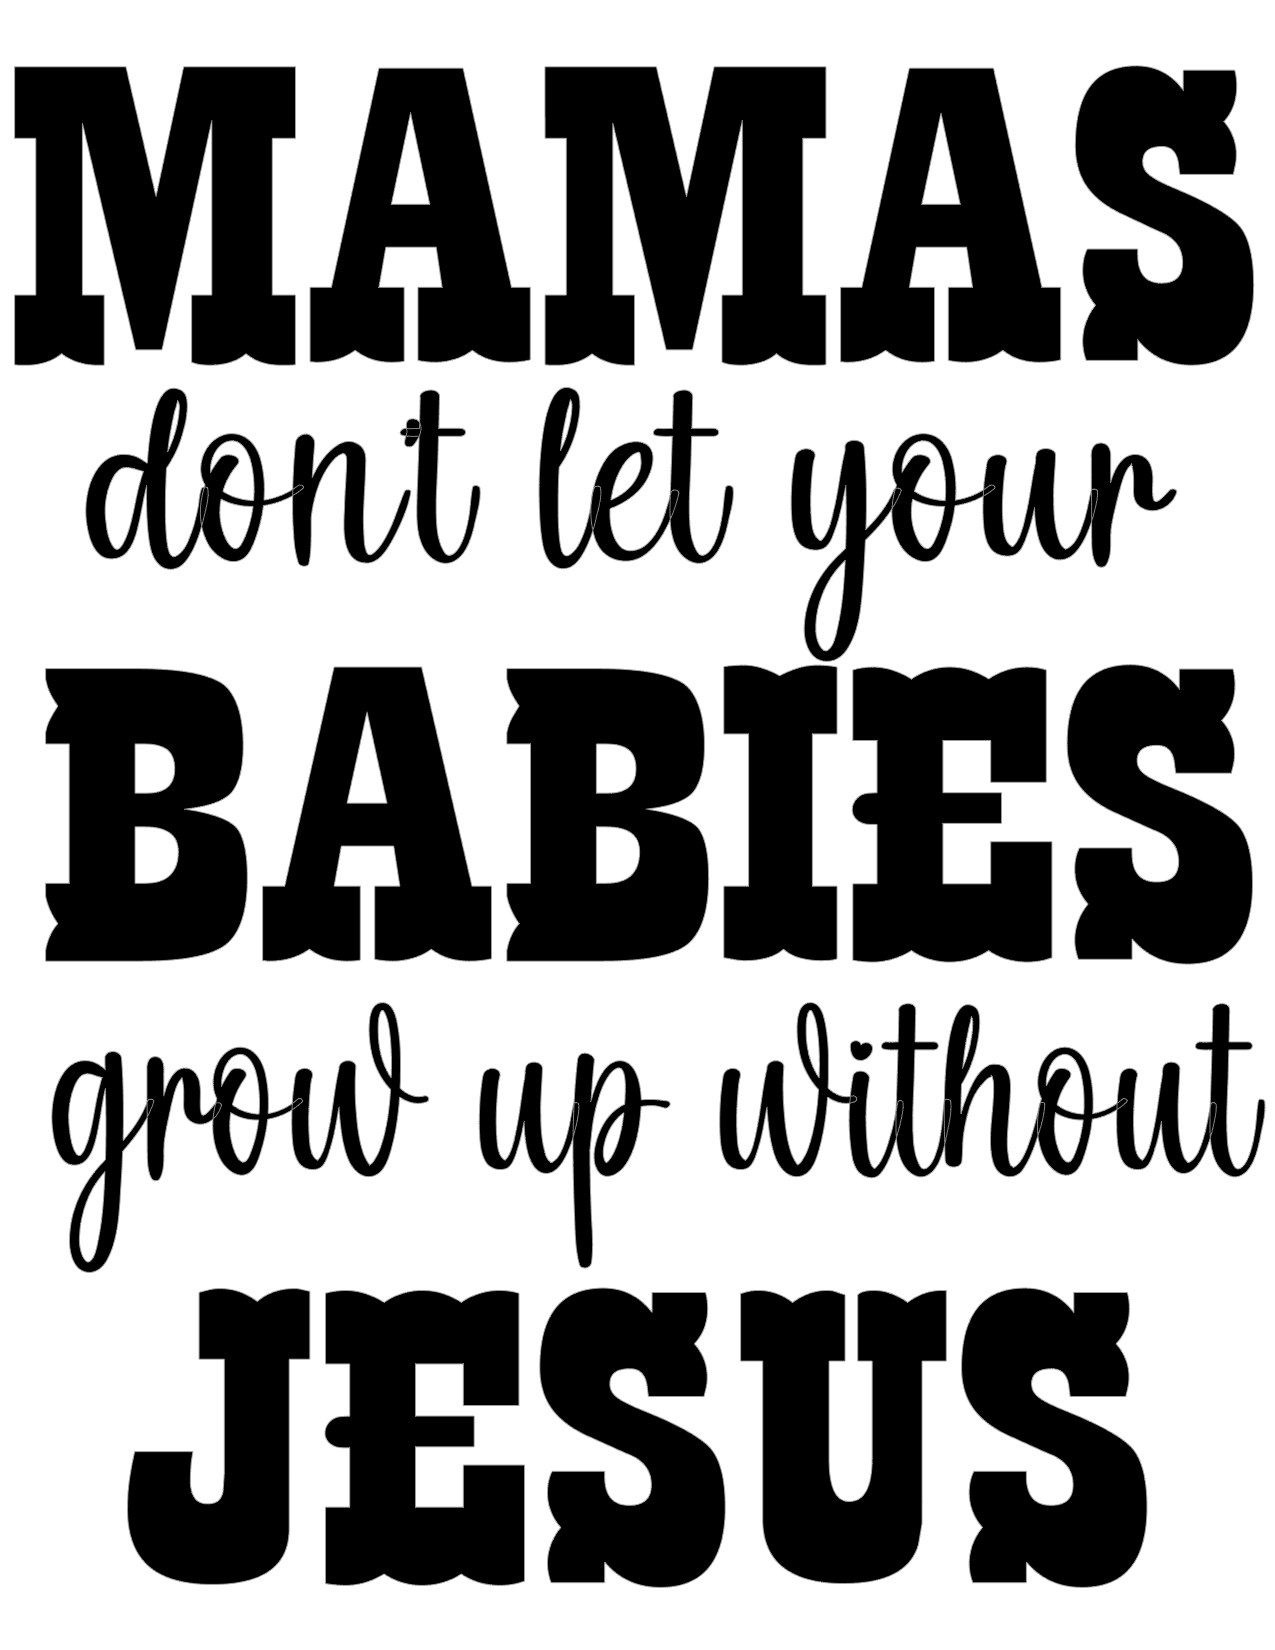 #208 MAMAs don't let your BABIES grow up without JESUS